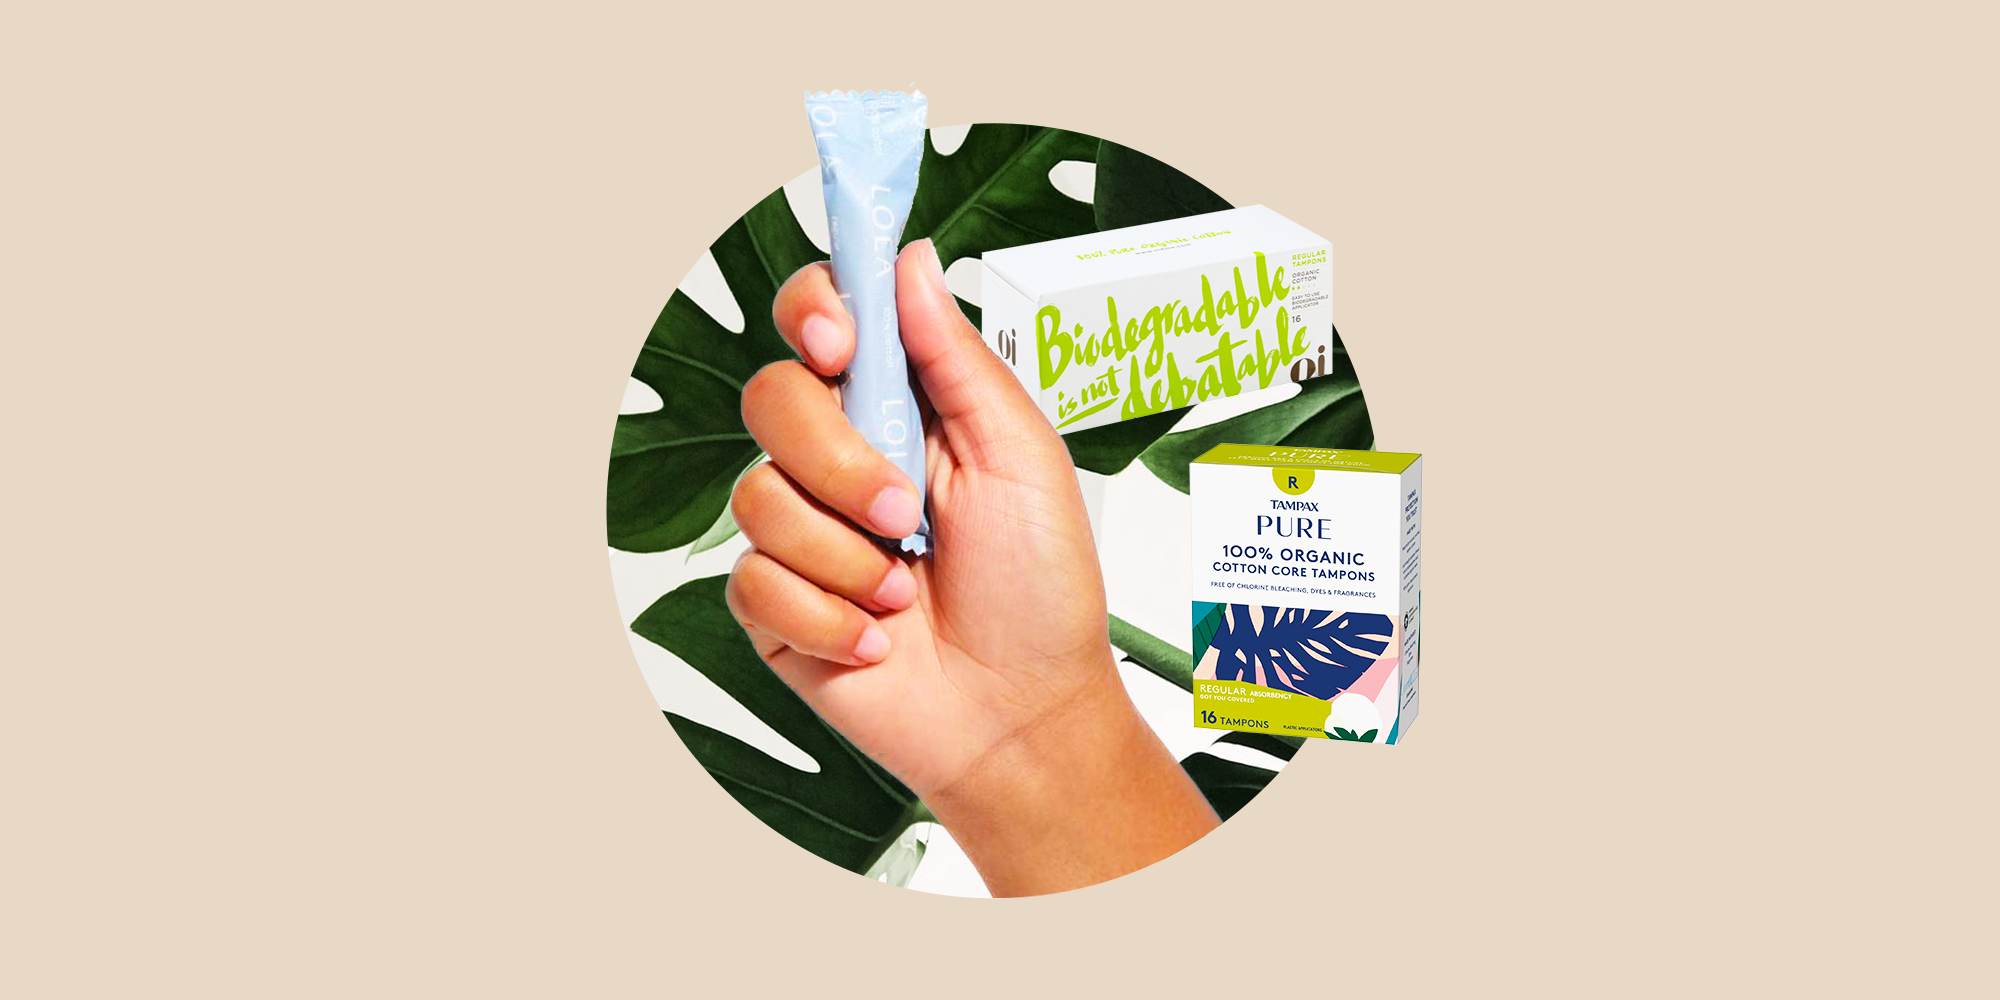 Organic Cotton Core Tampons